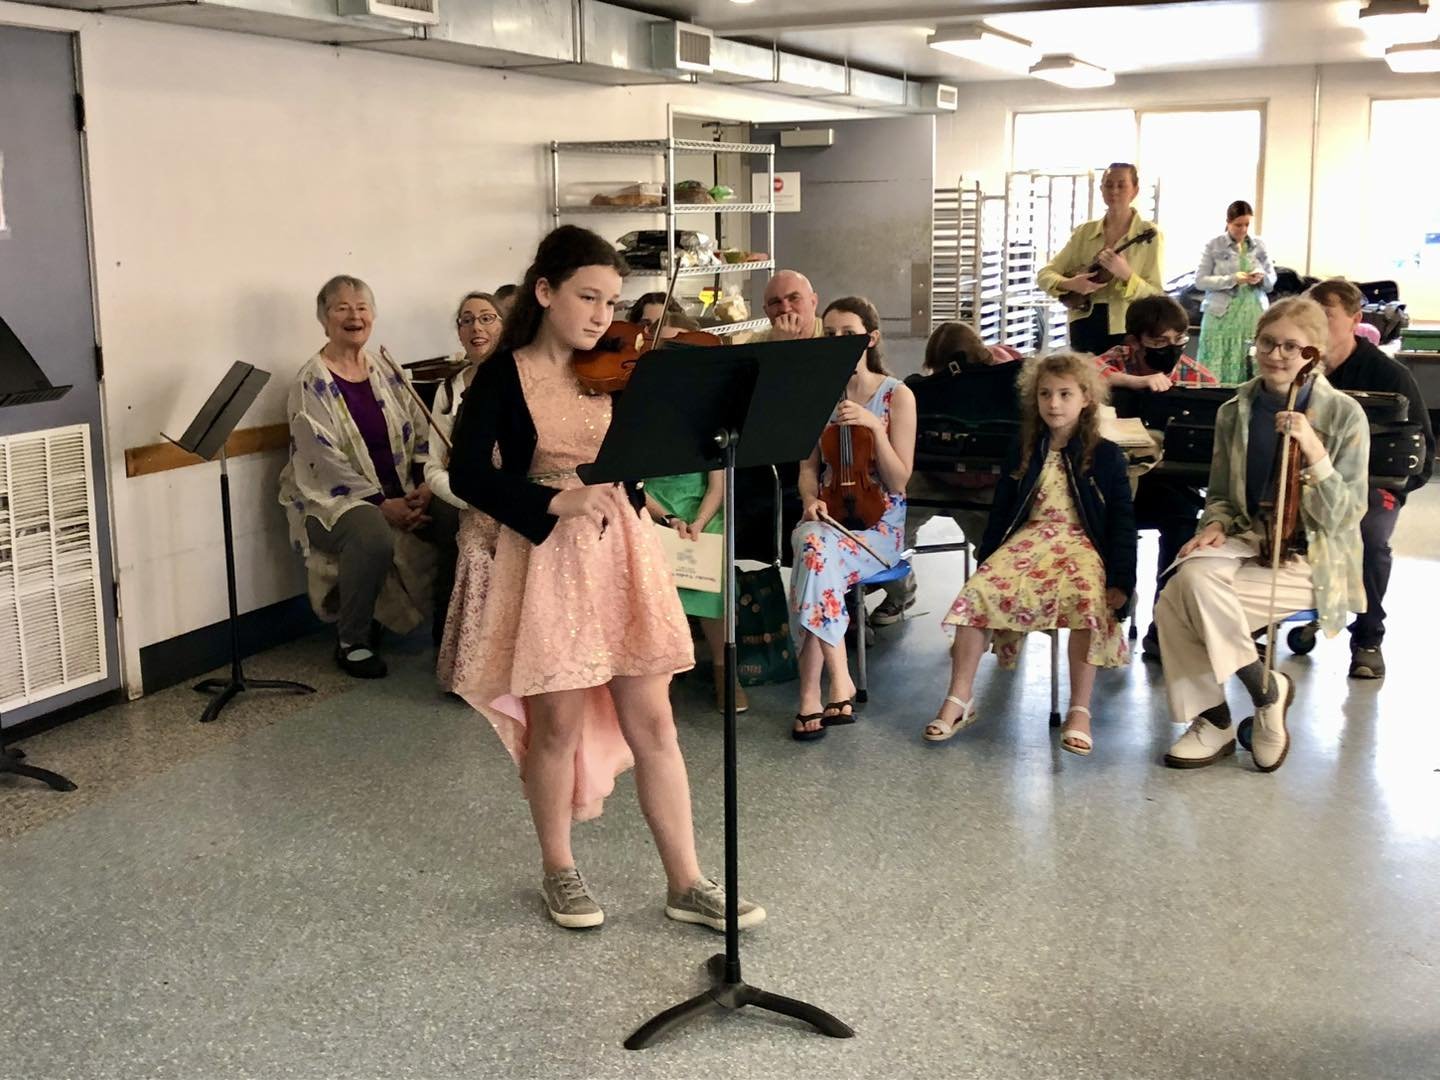 Guests at the Eugene Mission enjoyed dinner and a show over the weekend thanks to a group of talented violinists who wanted to share their love of music with us.
 
Alice Blankenship, owner and instructor of Petro Polaris Violin Studio, along with her